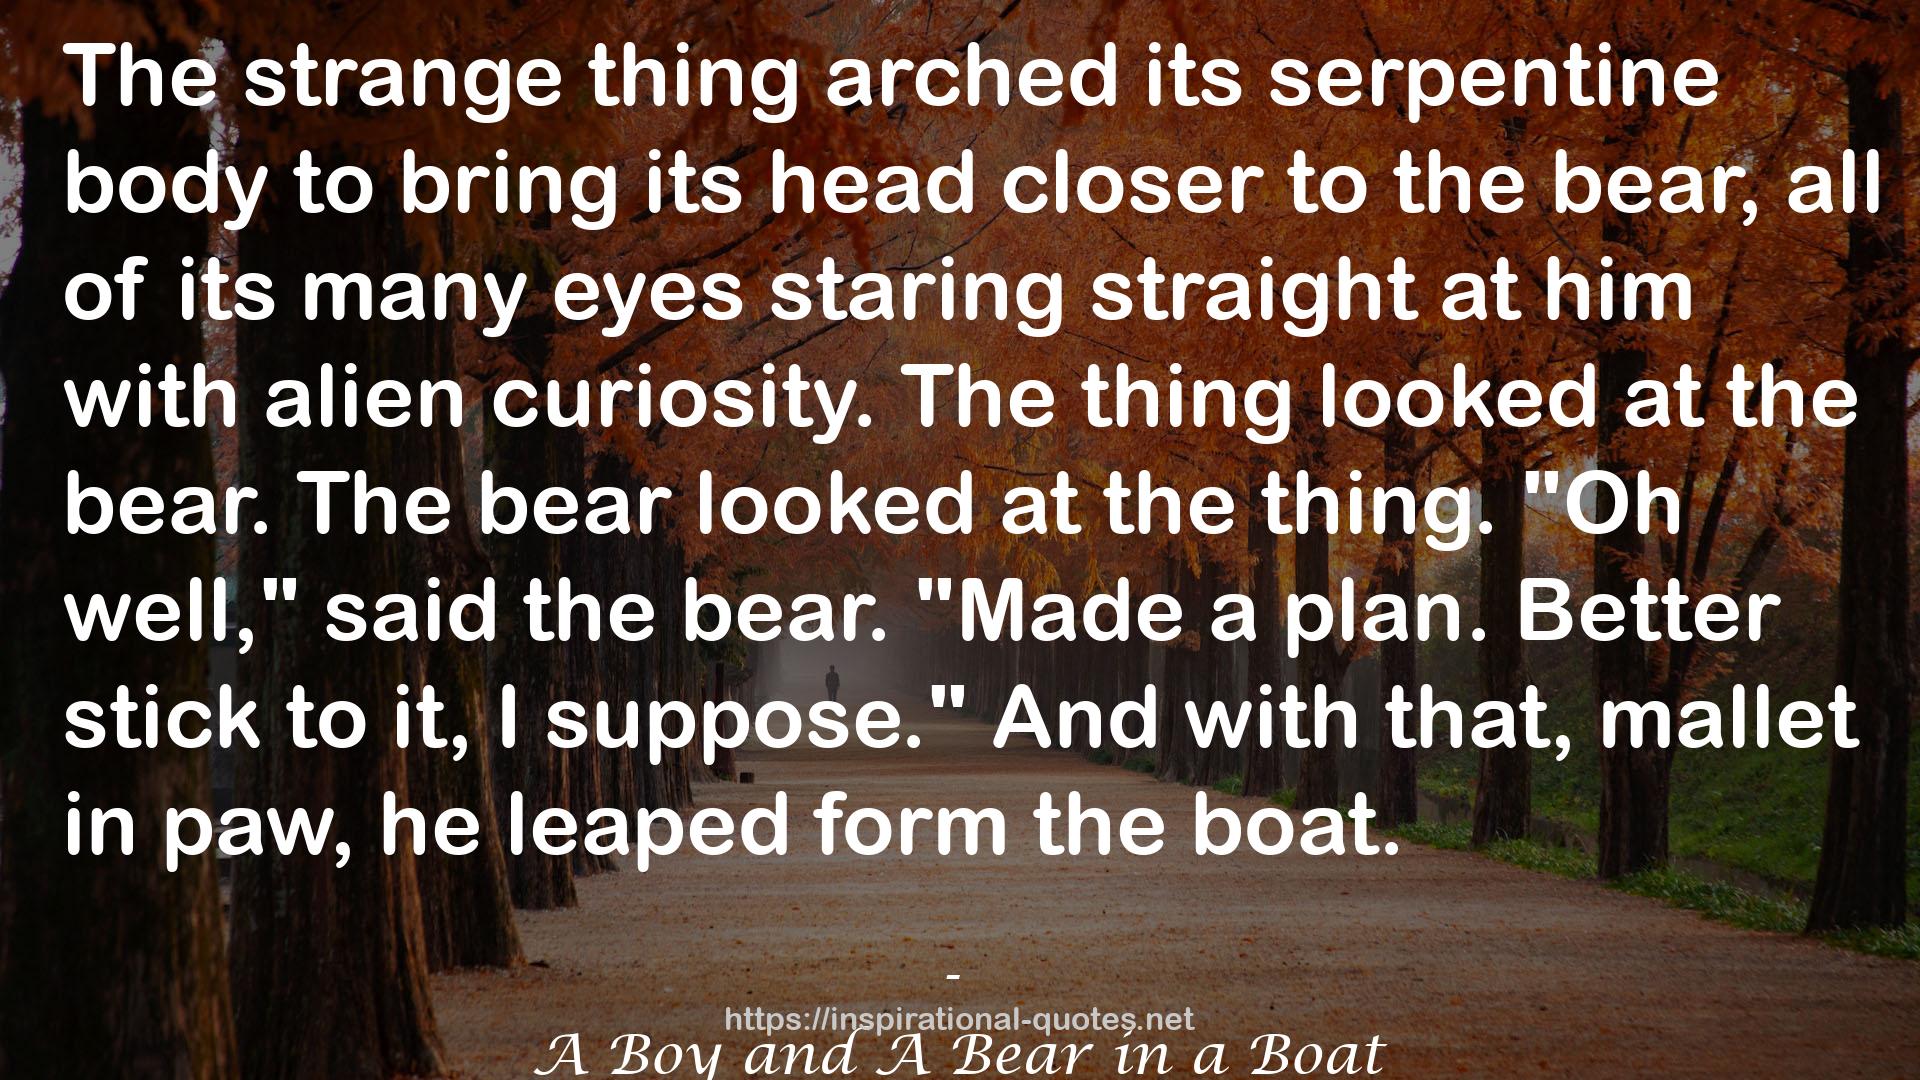 A Boy and A Bear in a Boat QUOTES